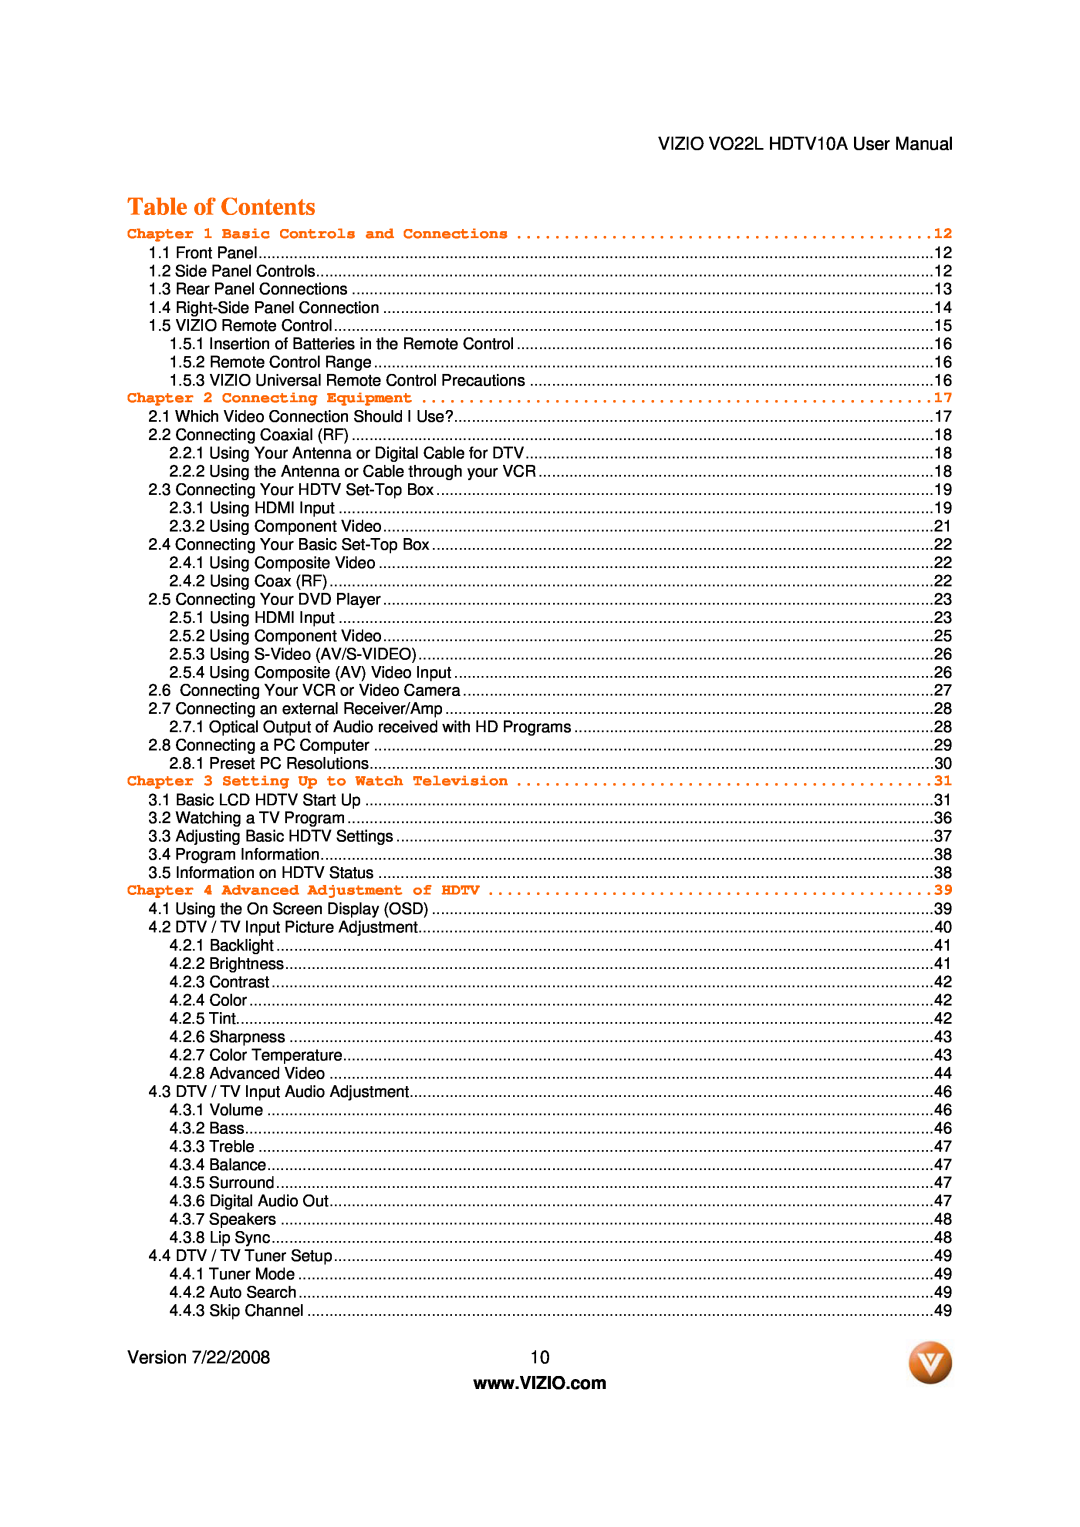 Vizio VO22L user manual Basic Controls and Connections, Table of Contents 